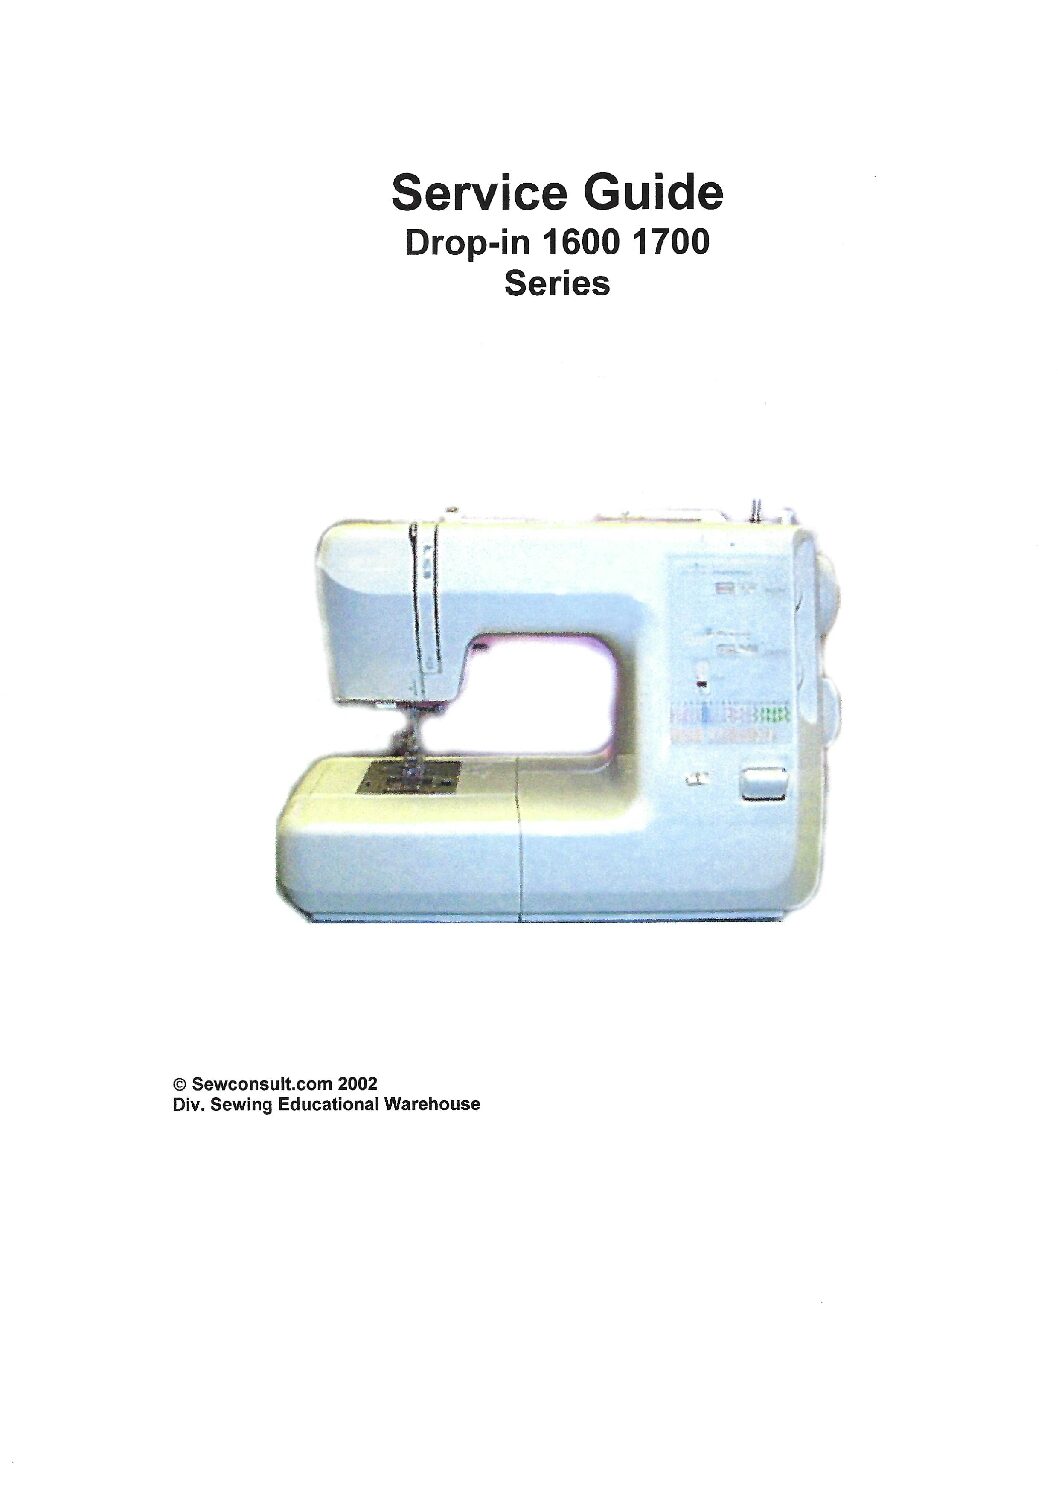 Service Manual Kenmore 385.17126690 Sewing Machine Archives - The